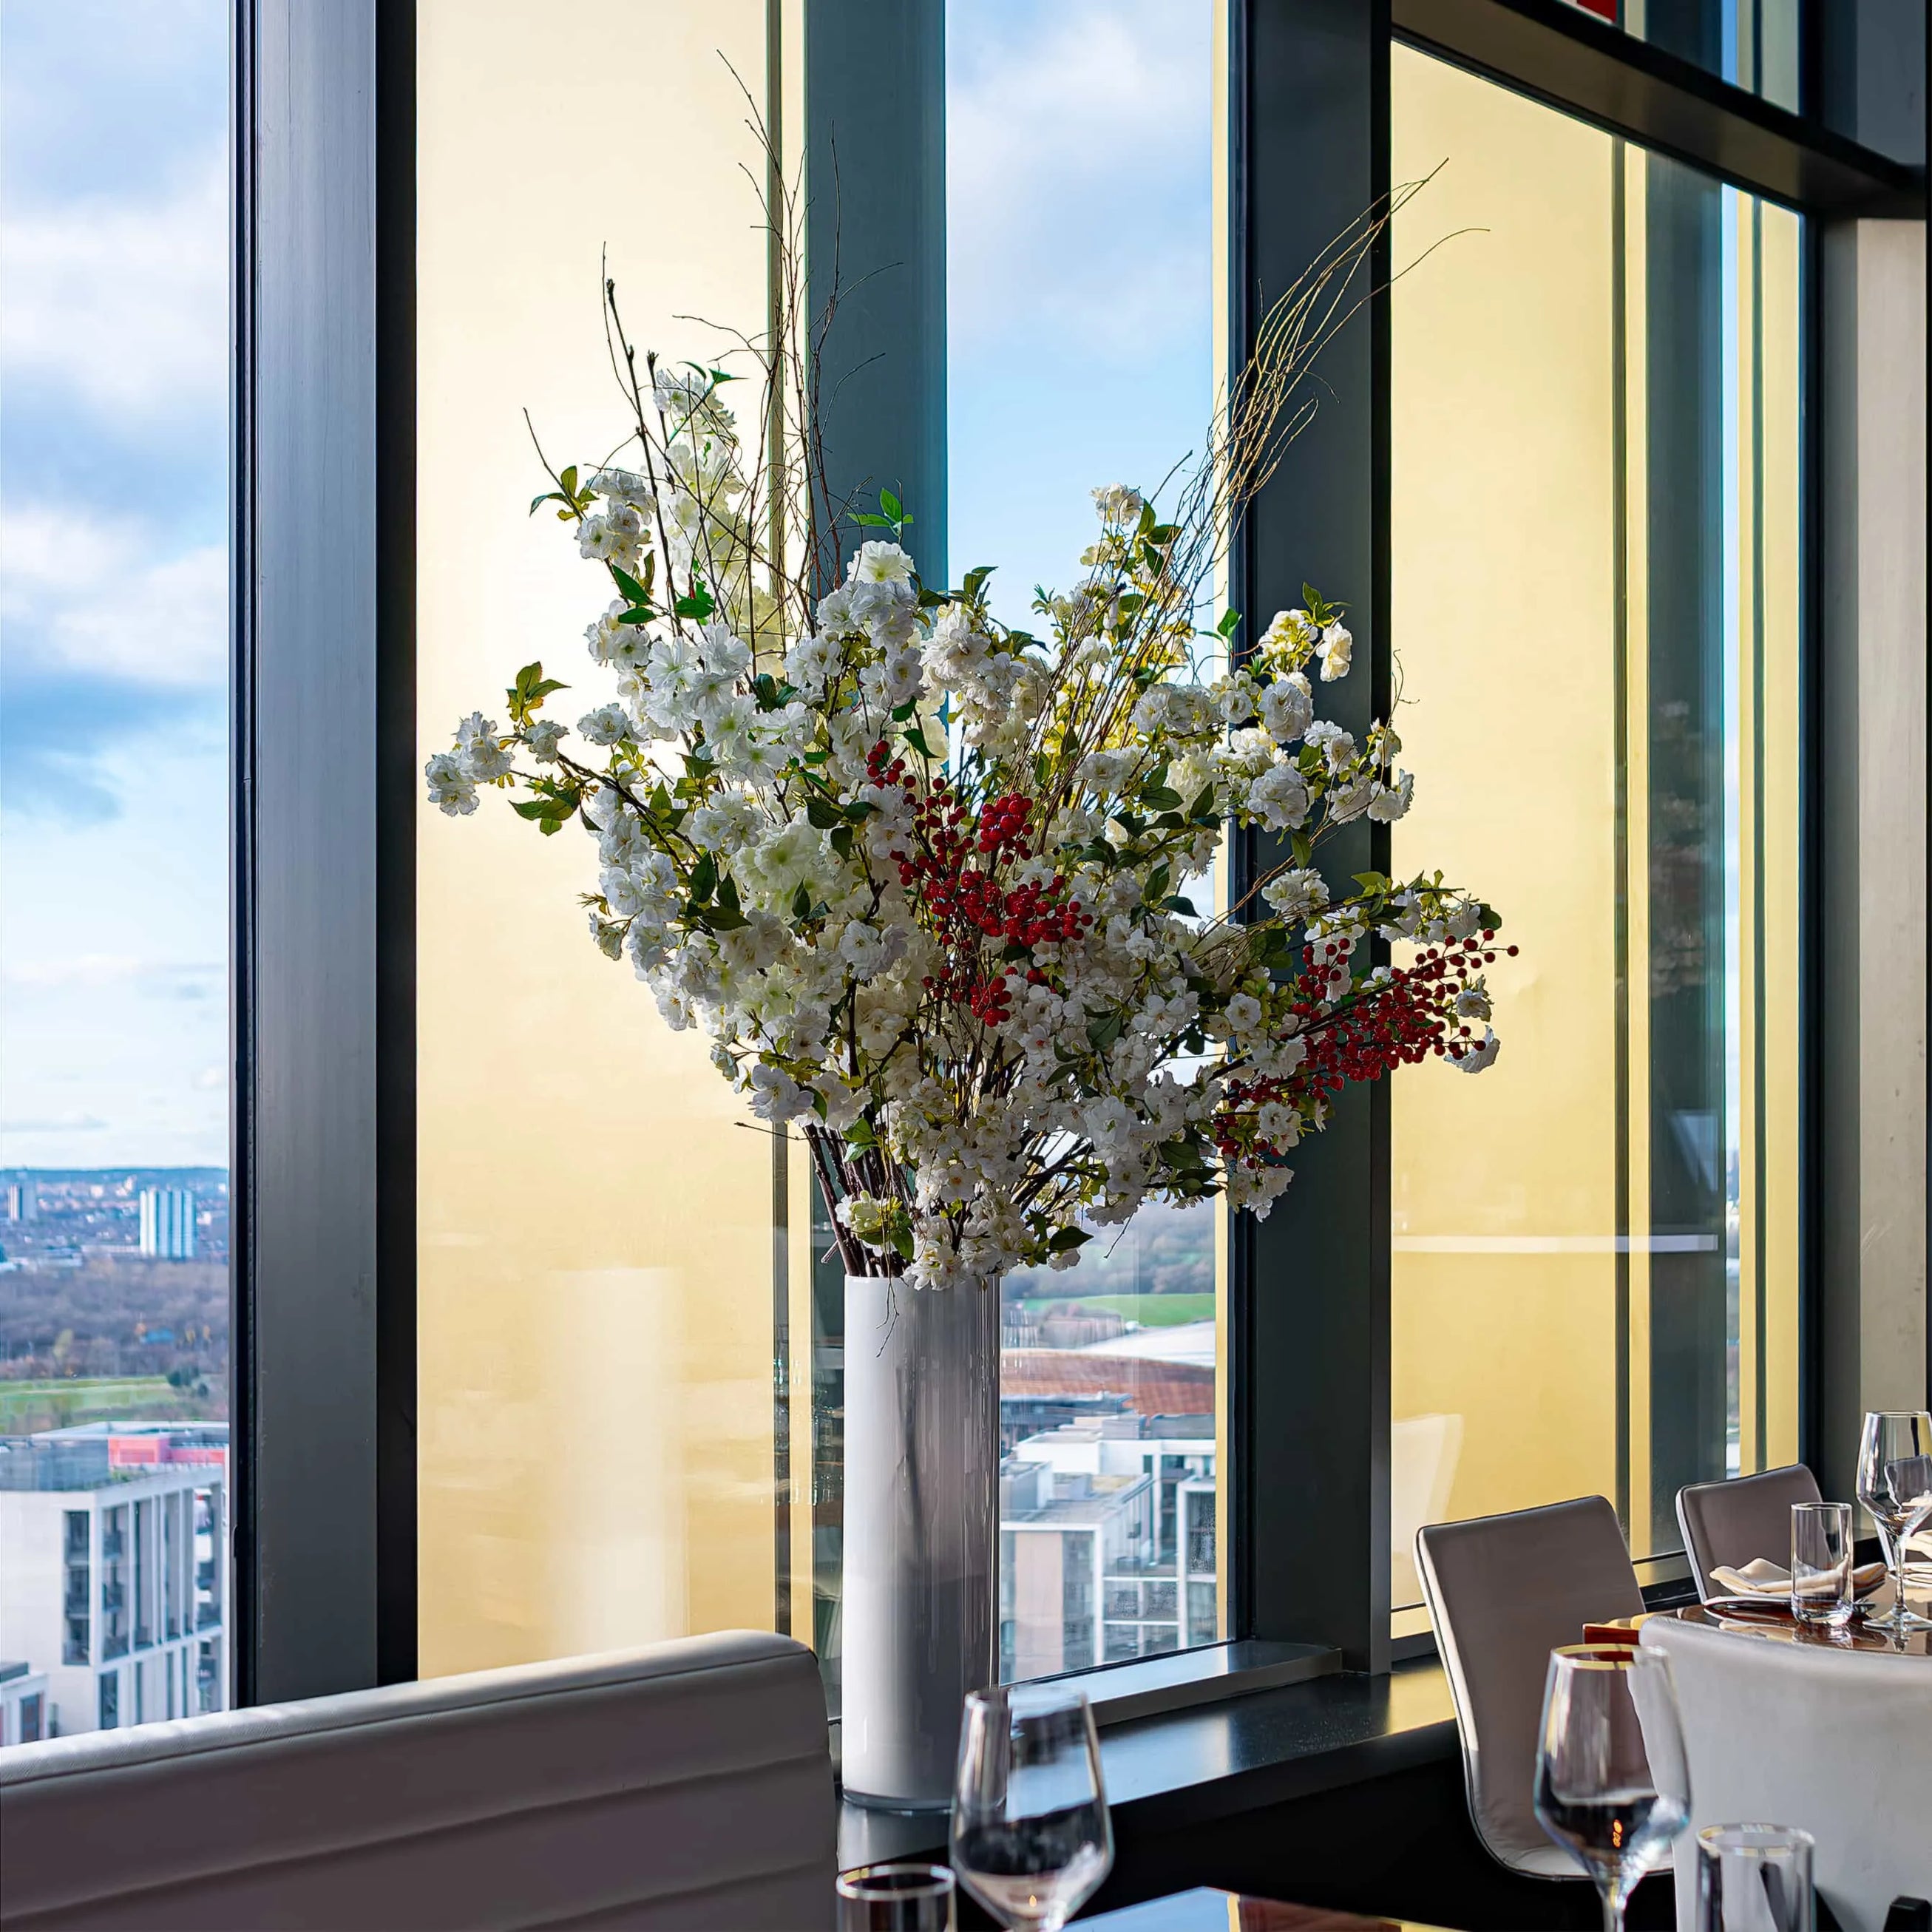 Elegant floral arrangement in a tall vase on a table at STK Steakhouse, with a backdrop of floor-to-ceiling windows offering a view of the urban landscape and blue sky.